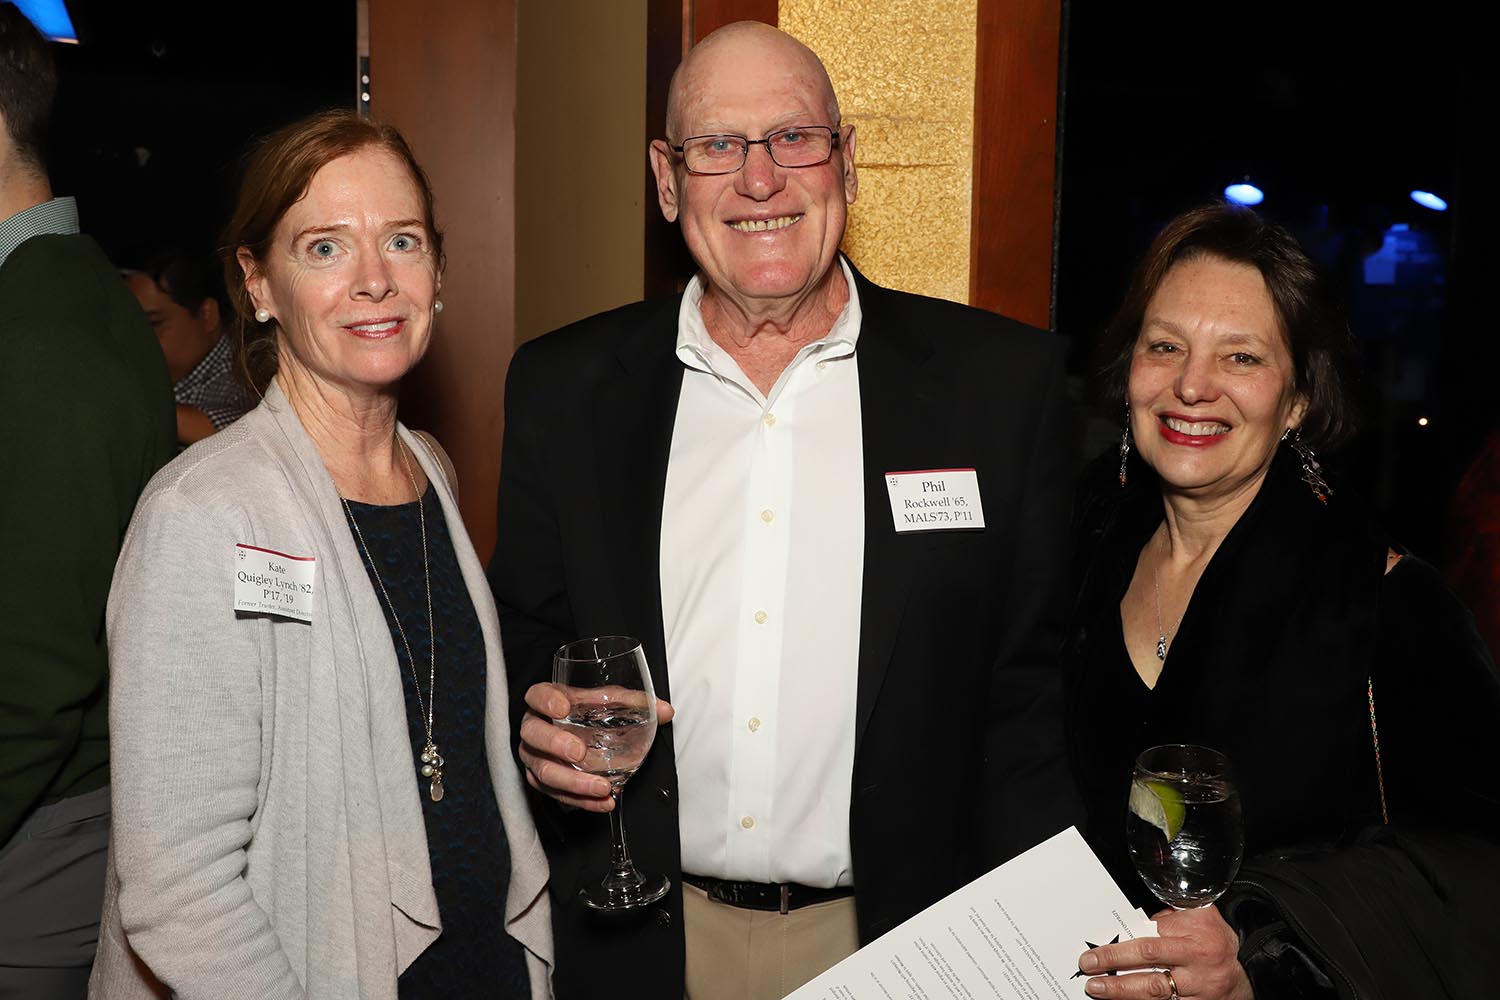 From left, Kate Quigley Lynch '82, P '17 '19, assistant director of The Wesleyan Fund, Phil Rockwell '65, MALS '73, P '11, Cynthia Rockwell P '11, managing editor of Wesleyan University Magazine.